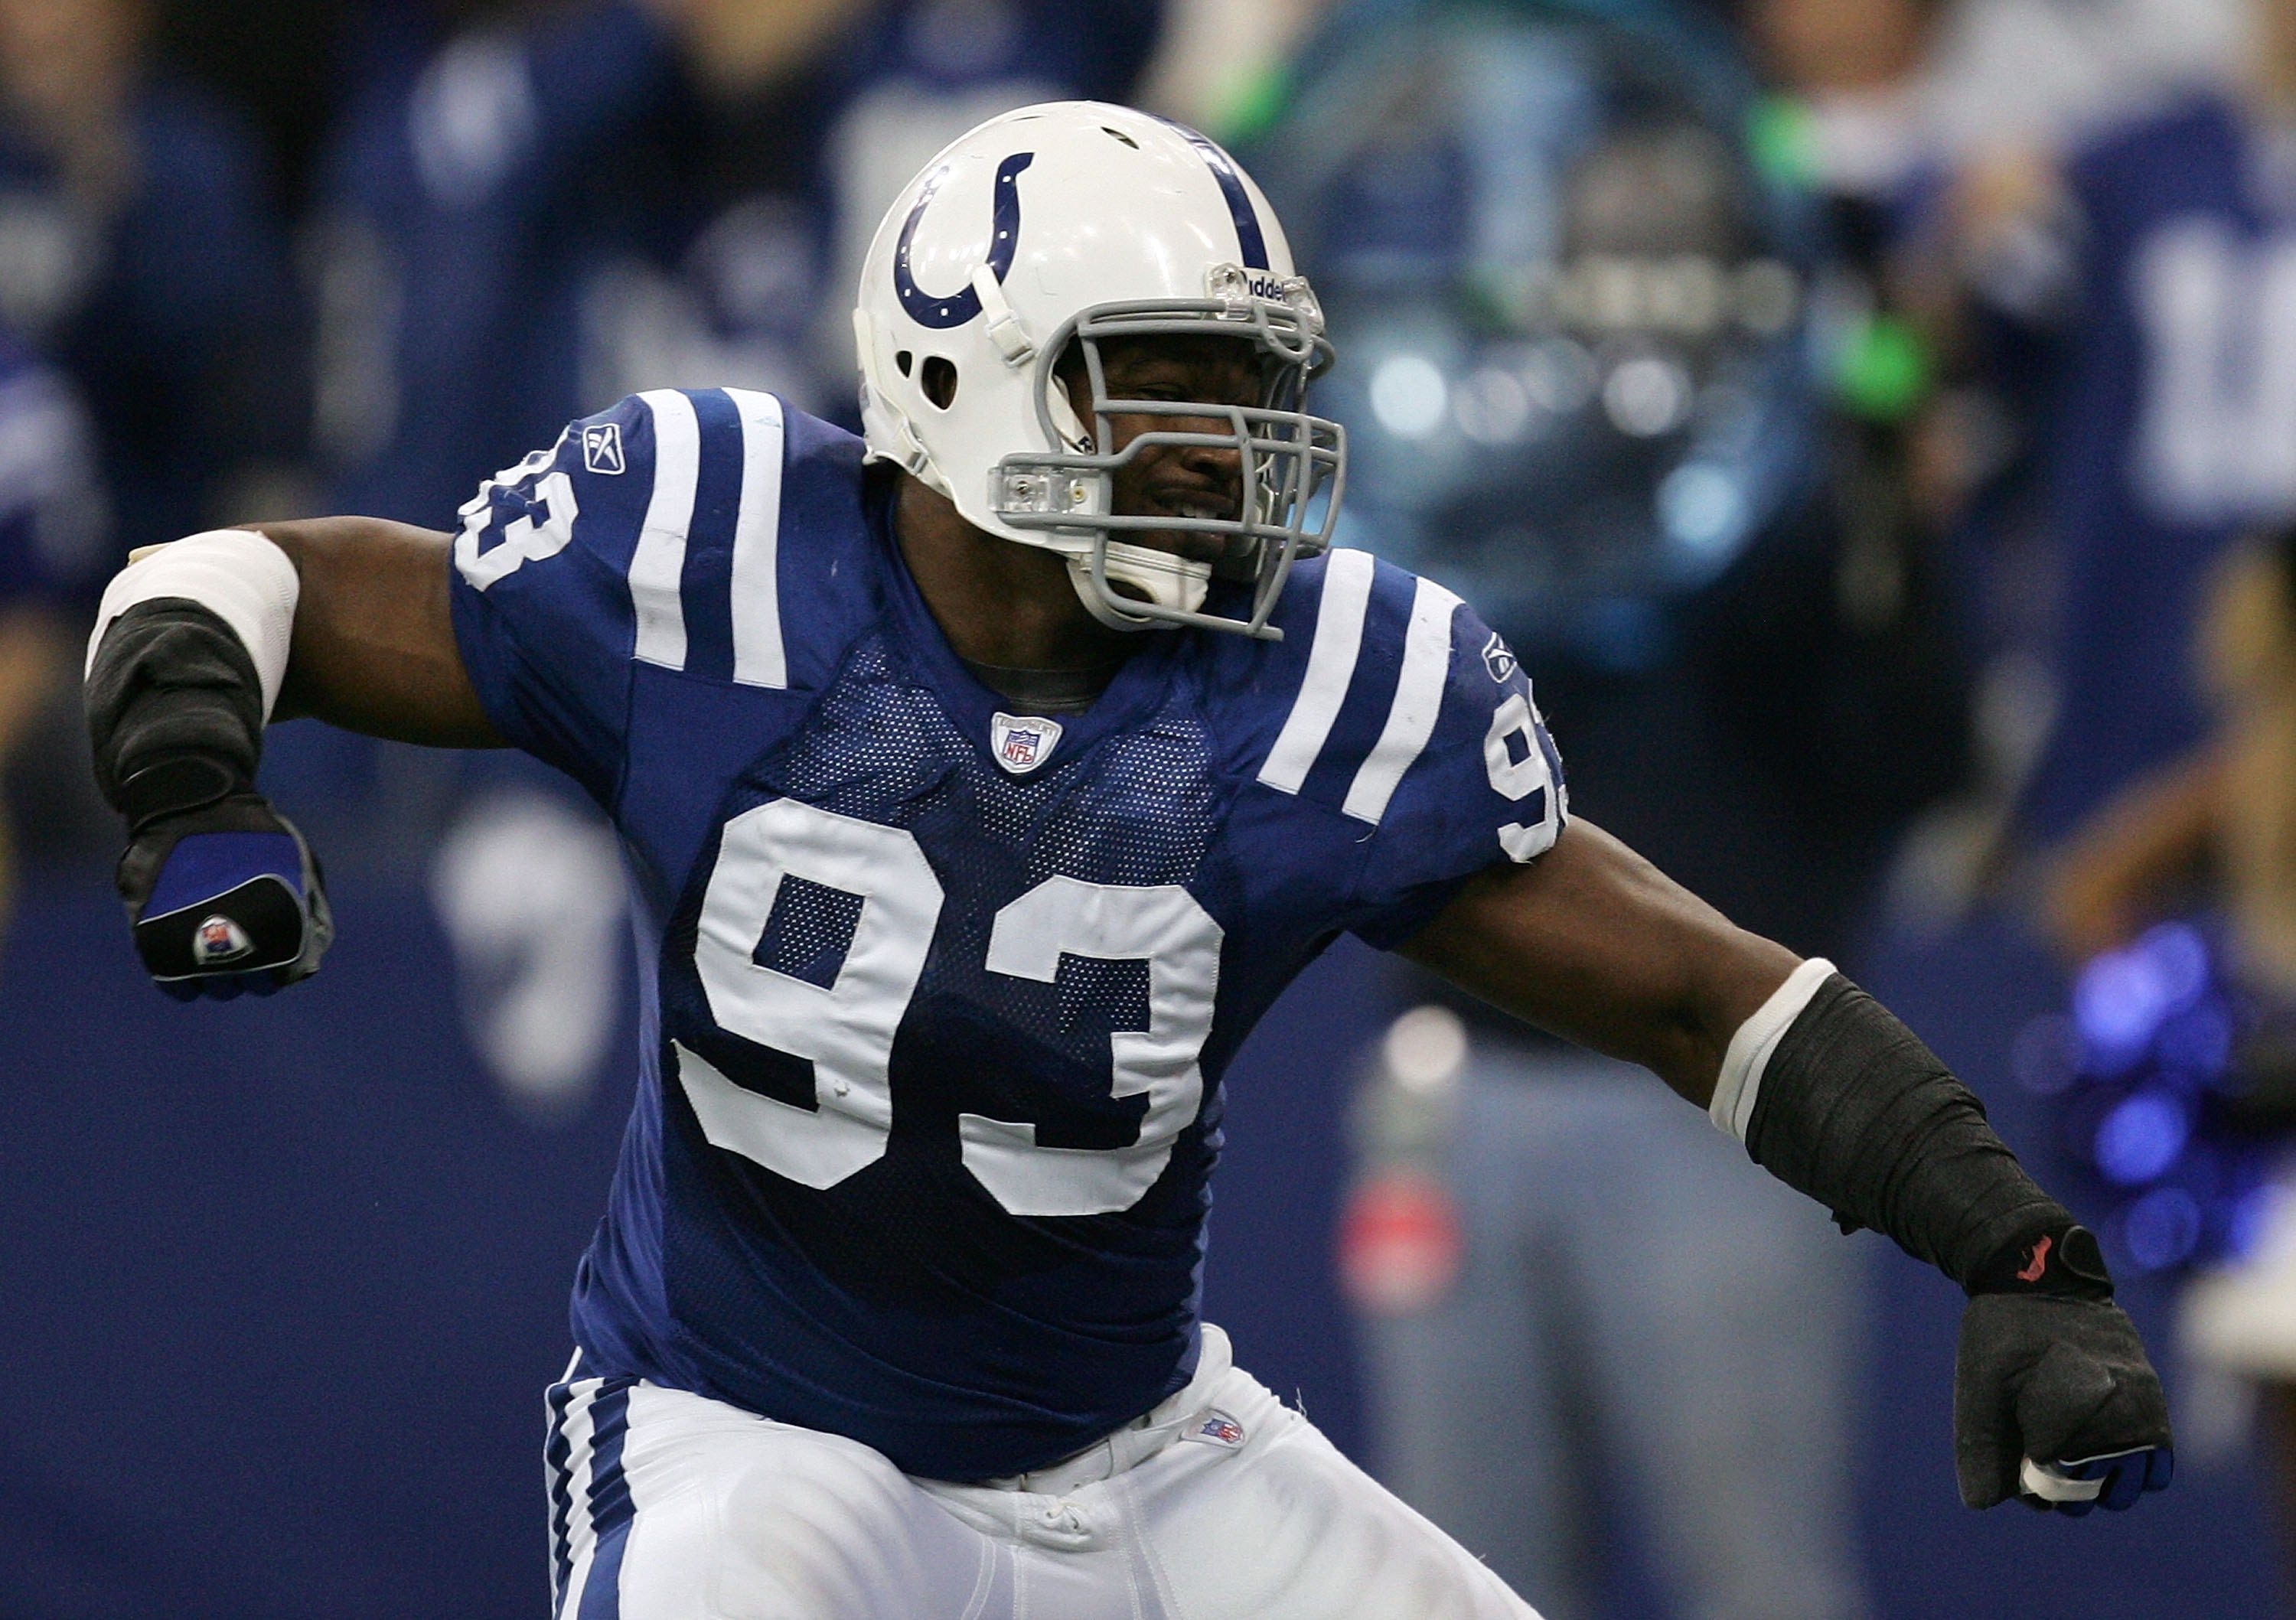 WATCH: Former Colts' DE Dwight Freeney puts on Hall of Fame Gold Jacket